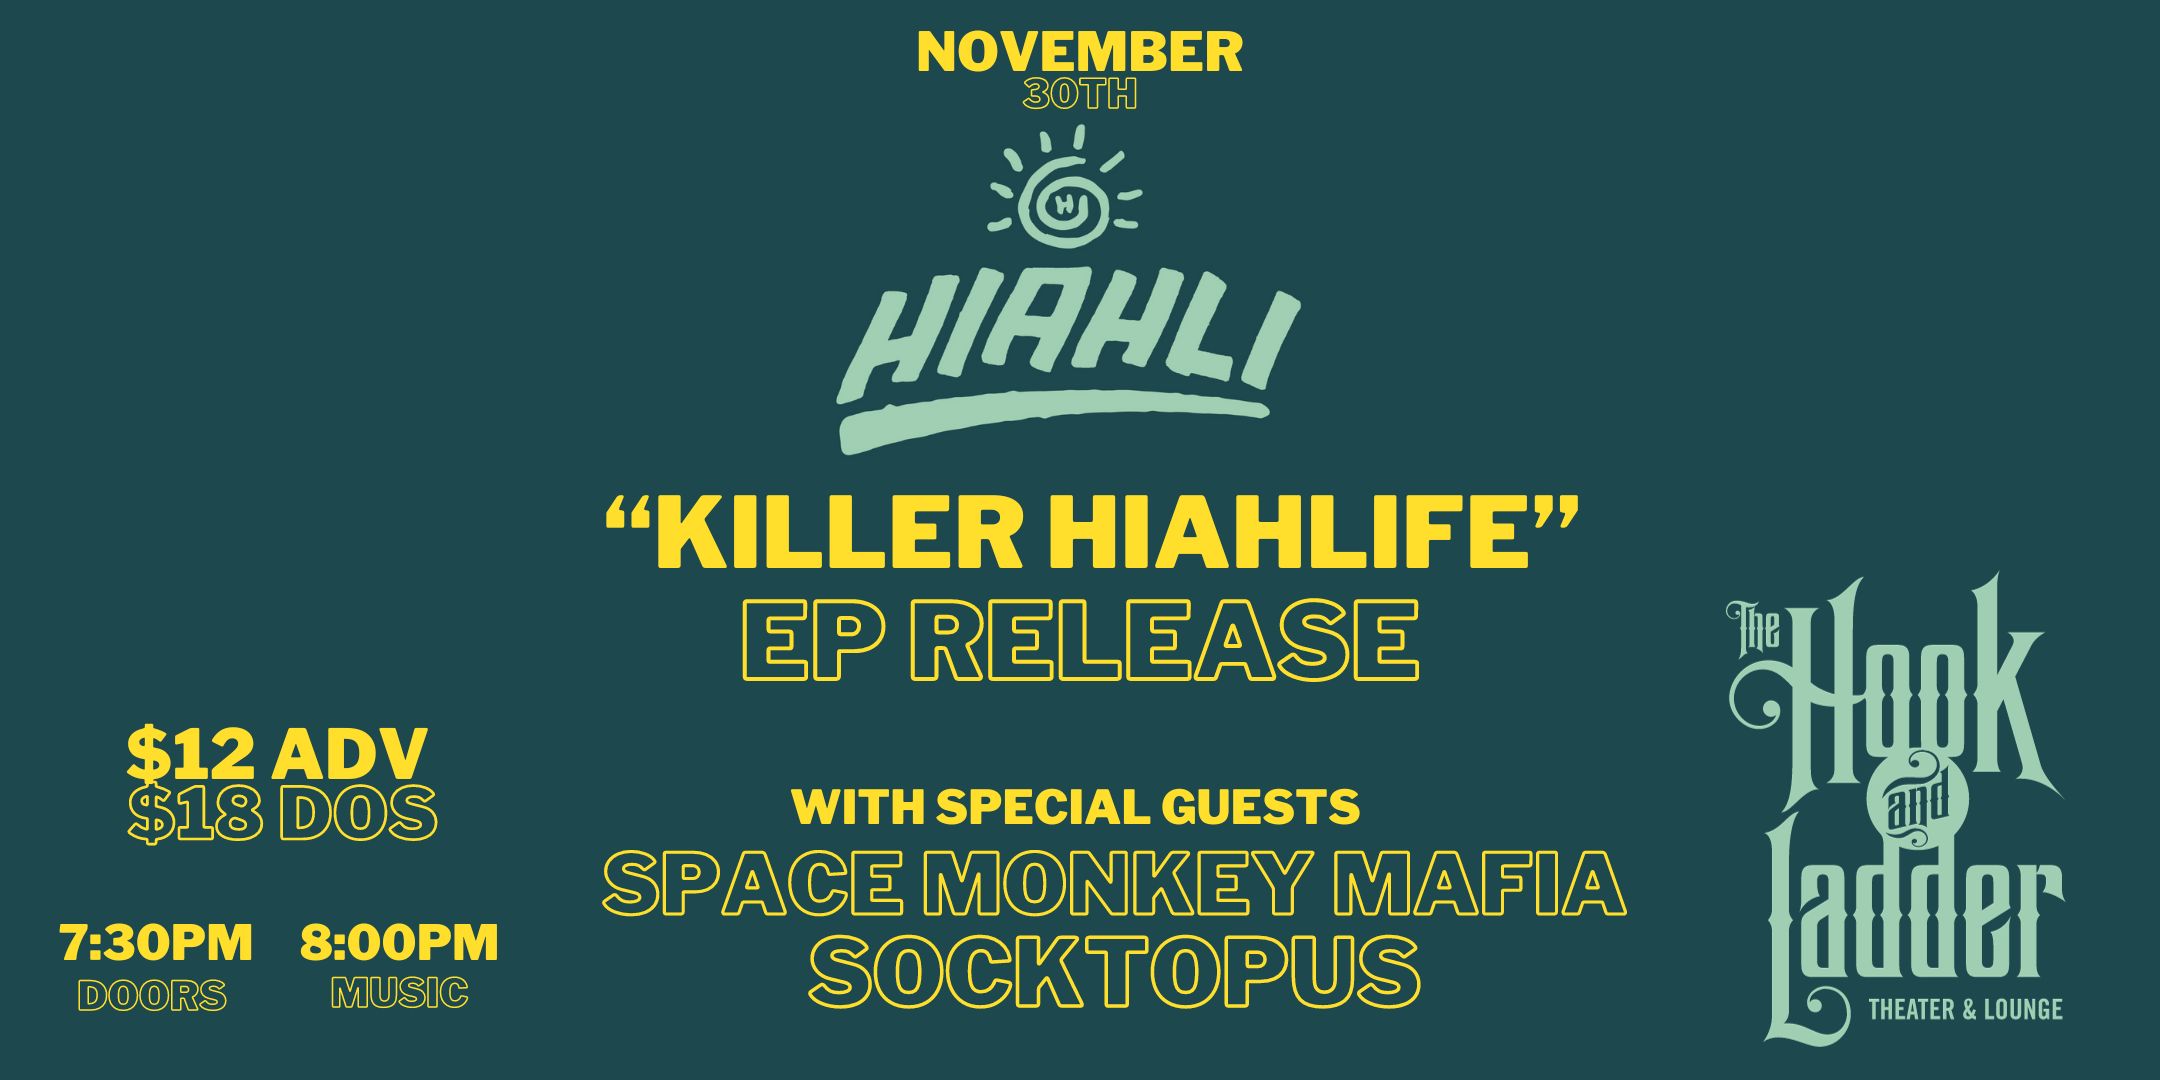 HIAHLI - "Killer Hialife" EP Release with Space Monkey Mafia, & Soctopus Thursday November 30 Mission Room at The Hook Doors 7:30pm :: Music 8:00pm :: 21+ General Admission * $12 ADV / $18 DOS * Does not include fees NO REFUNDS